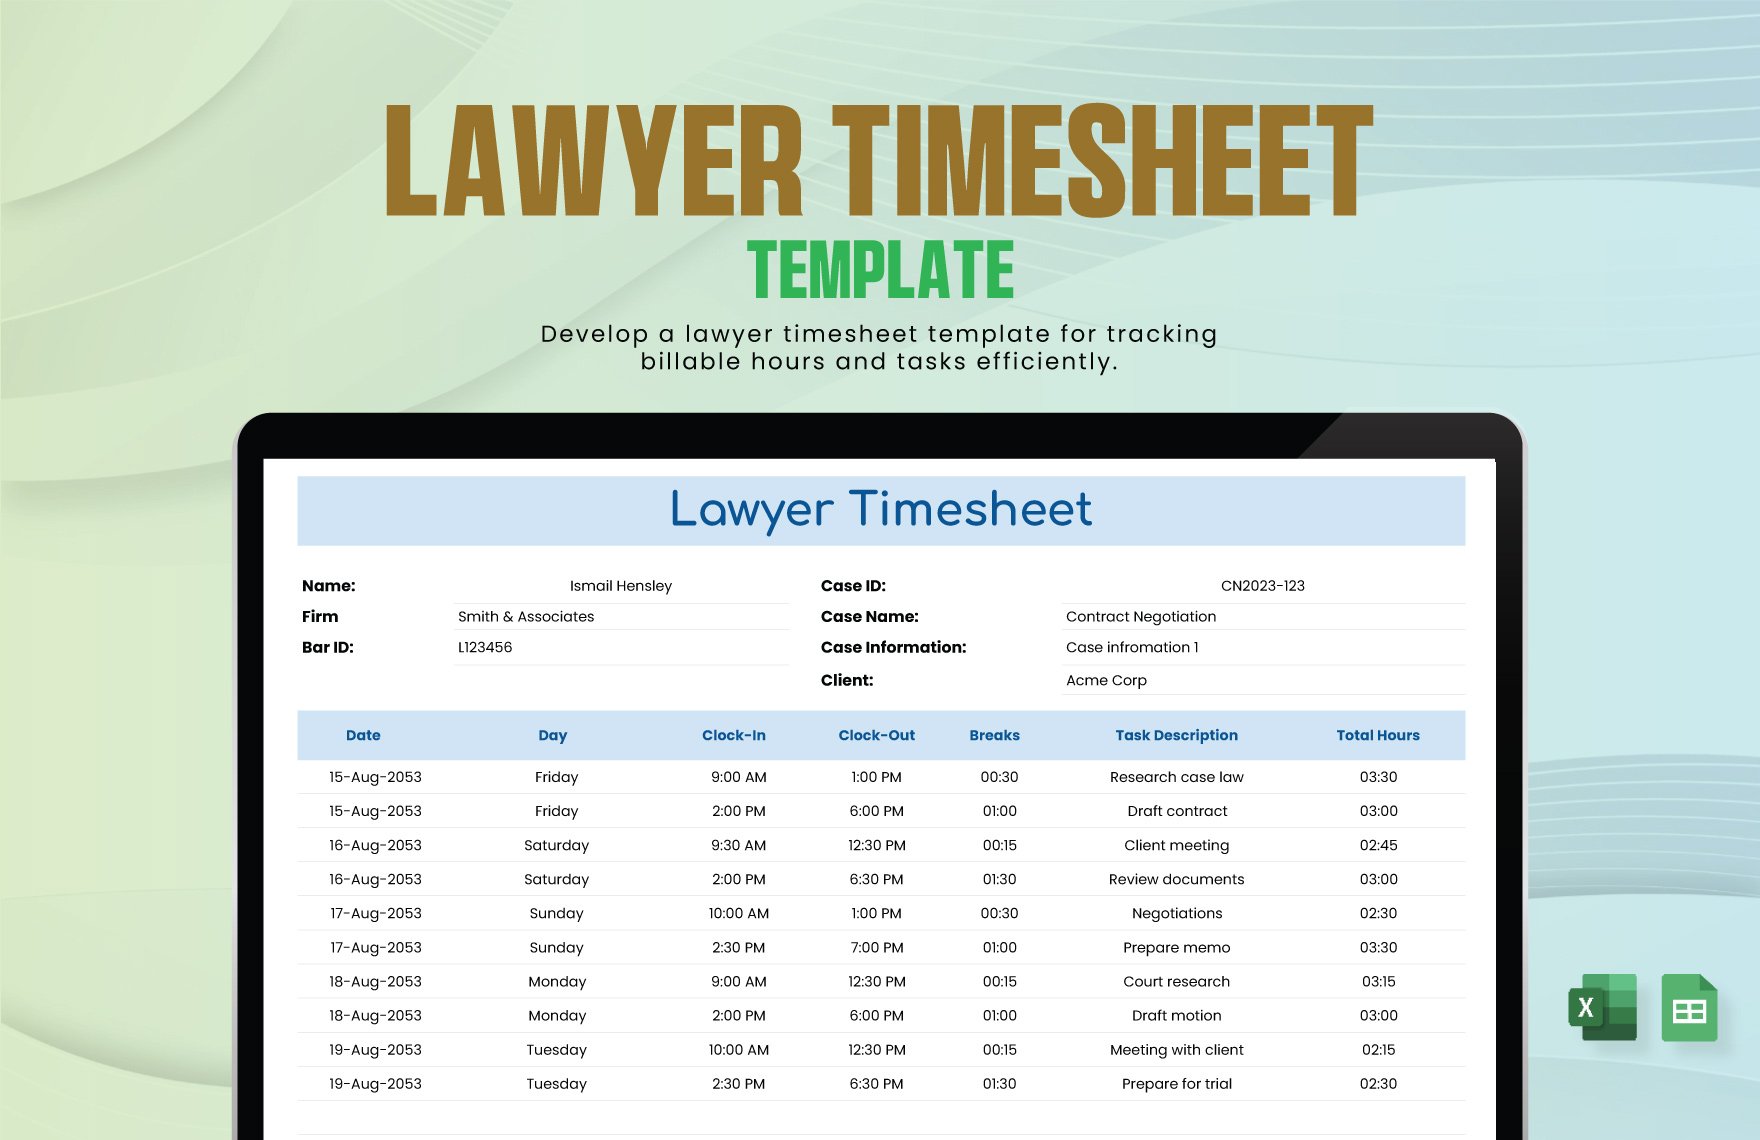 Lawyer Timesheet Template in Excel, Google Sheets